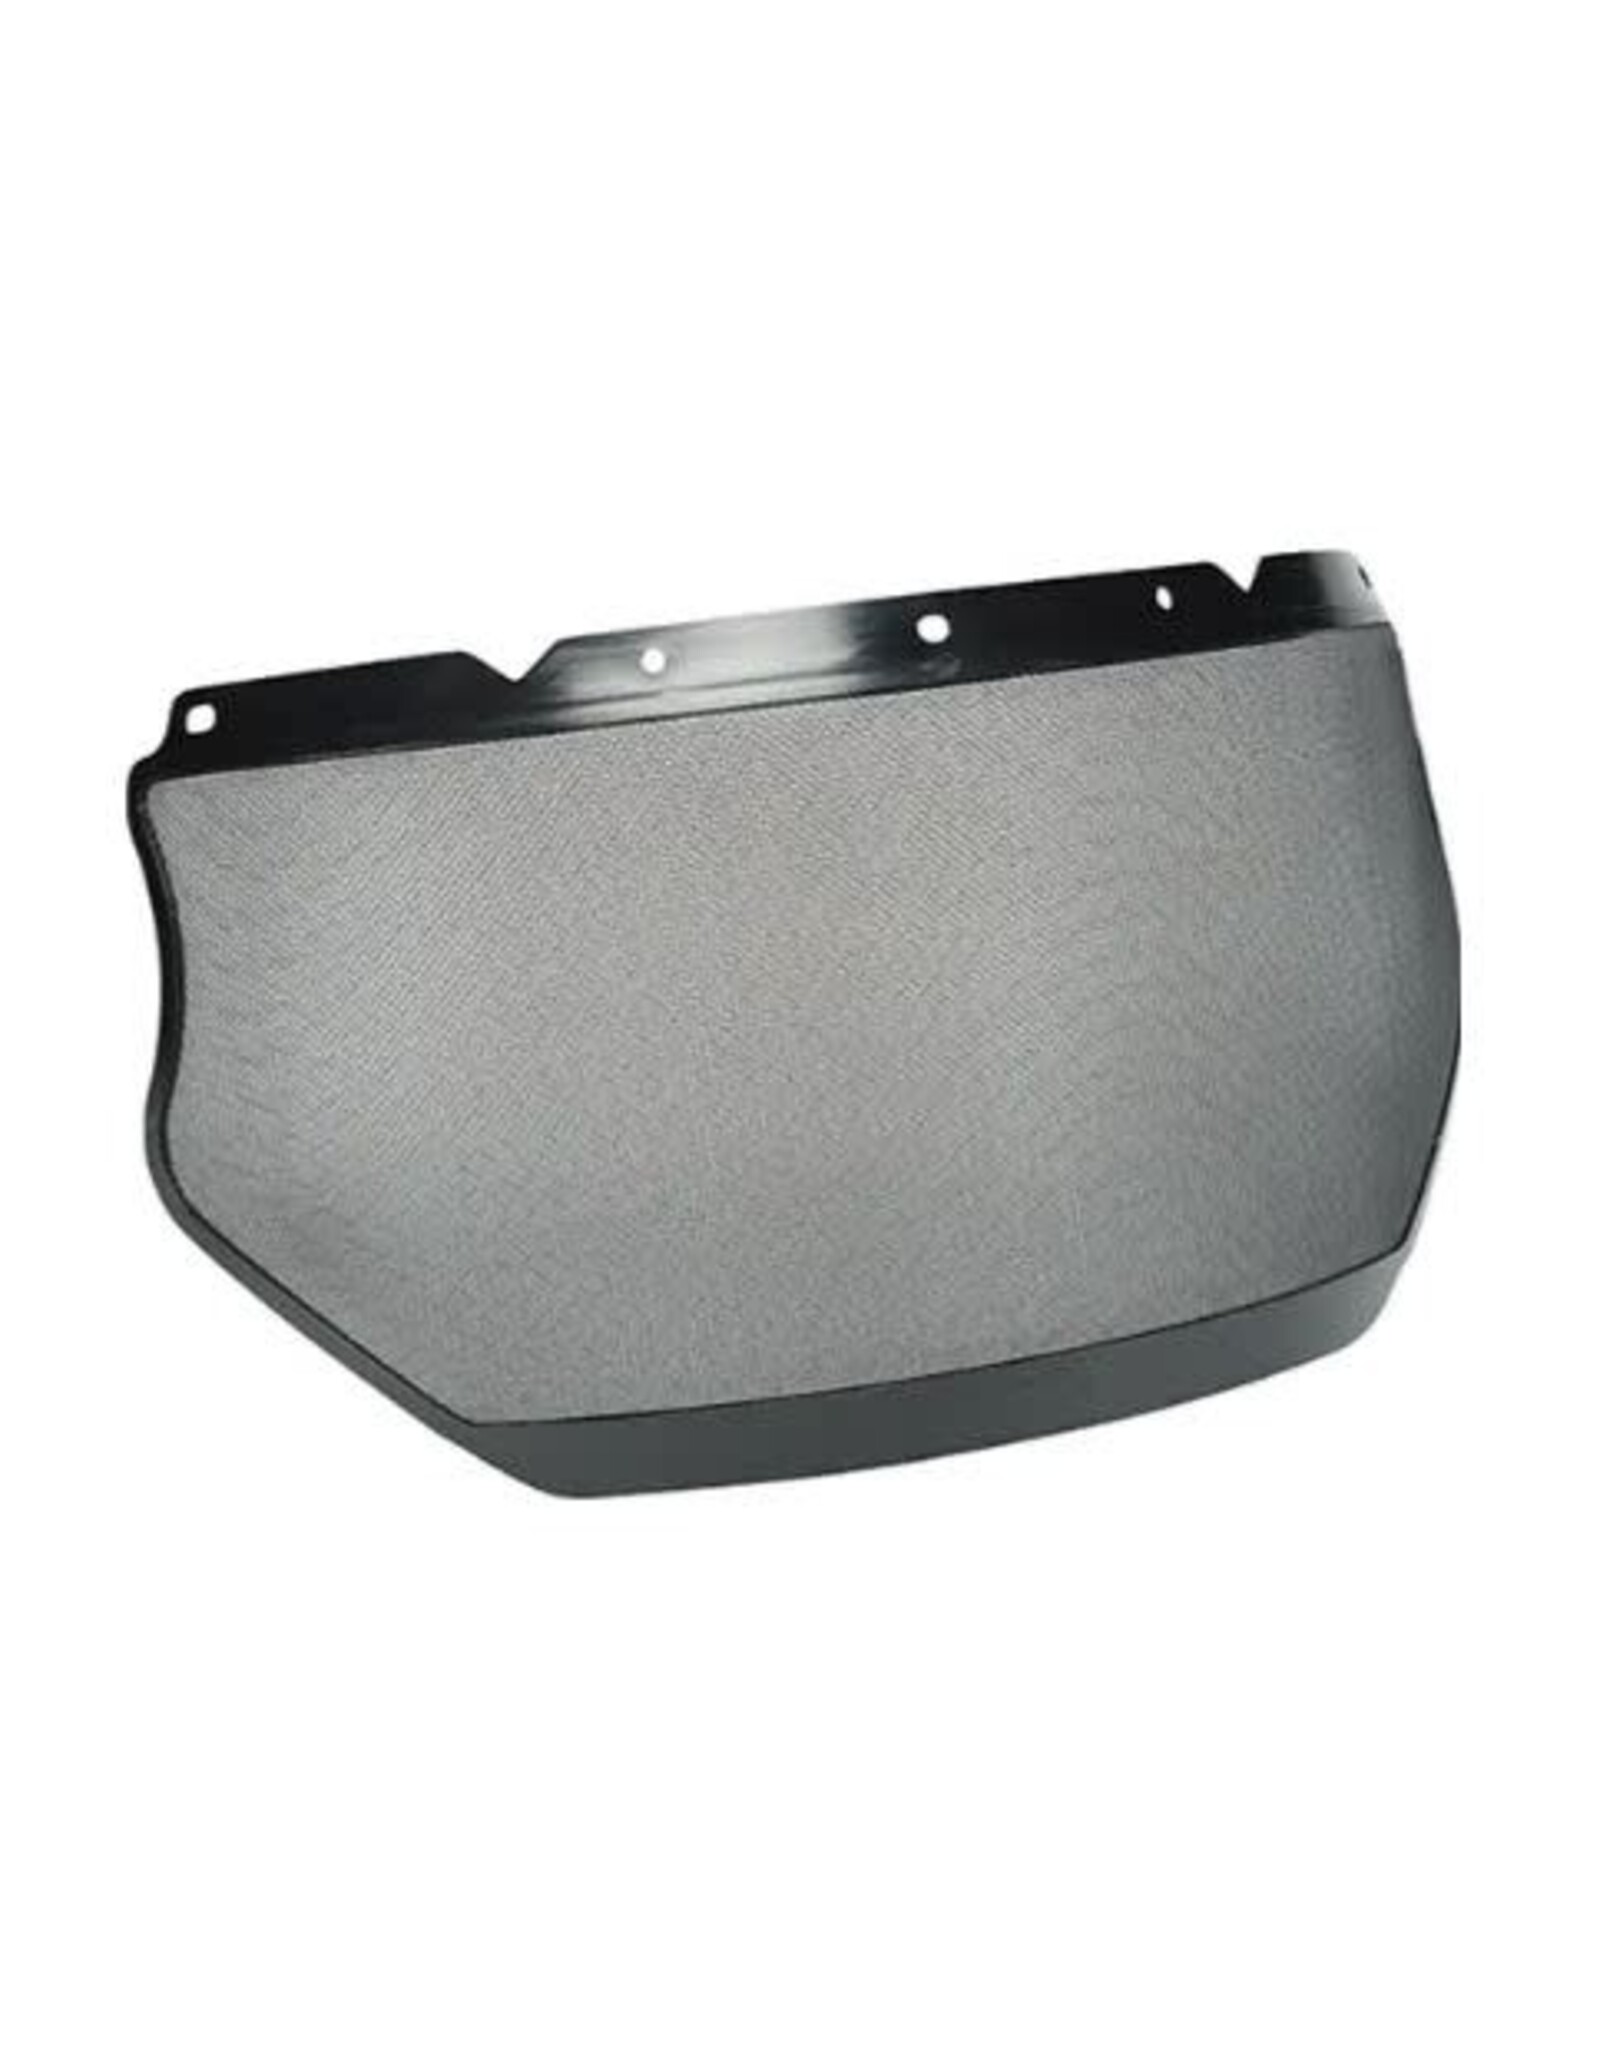 MSA Universal Forestry Face shield